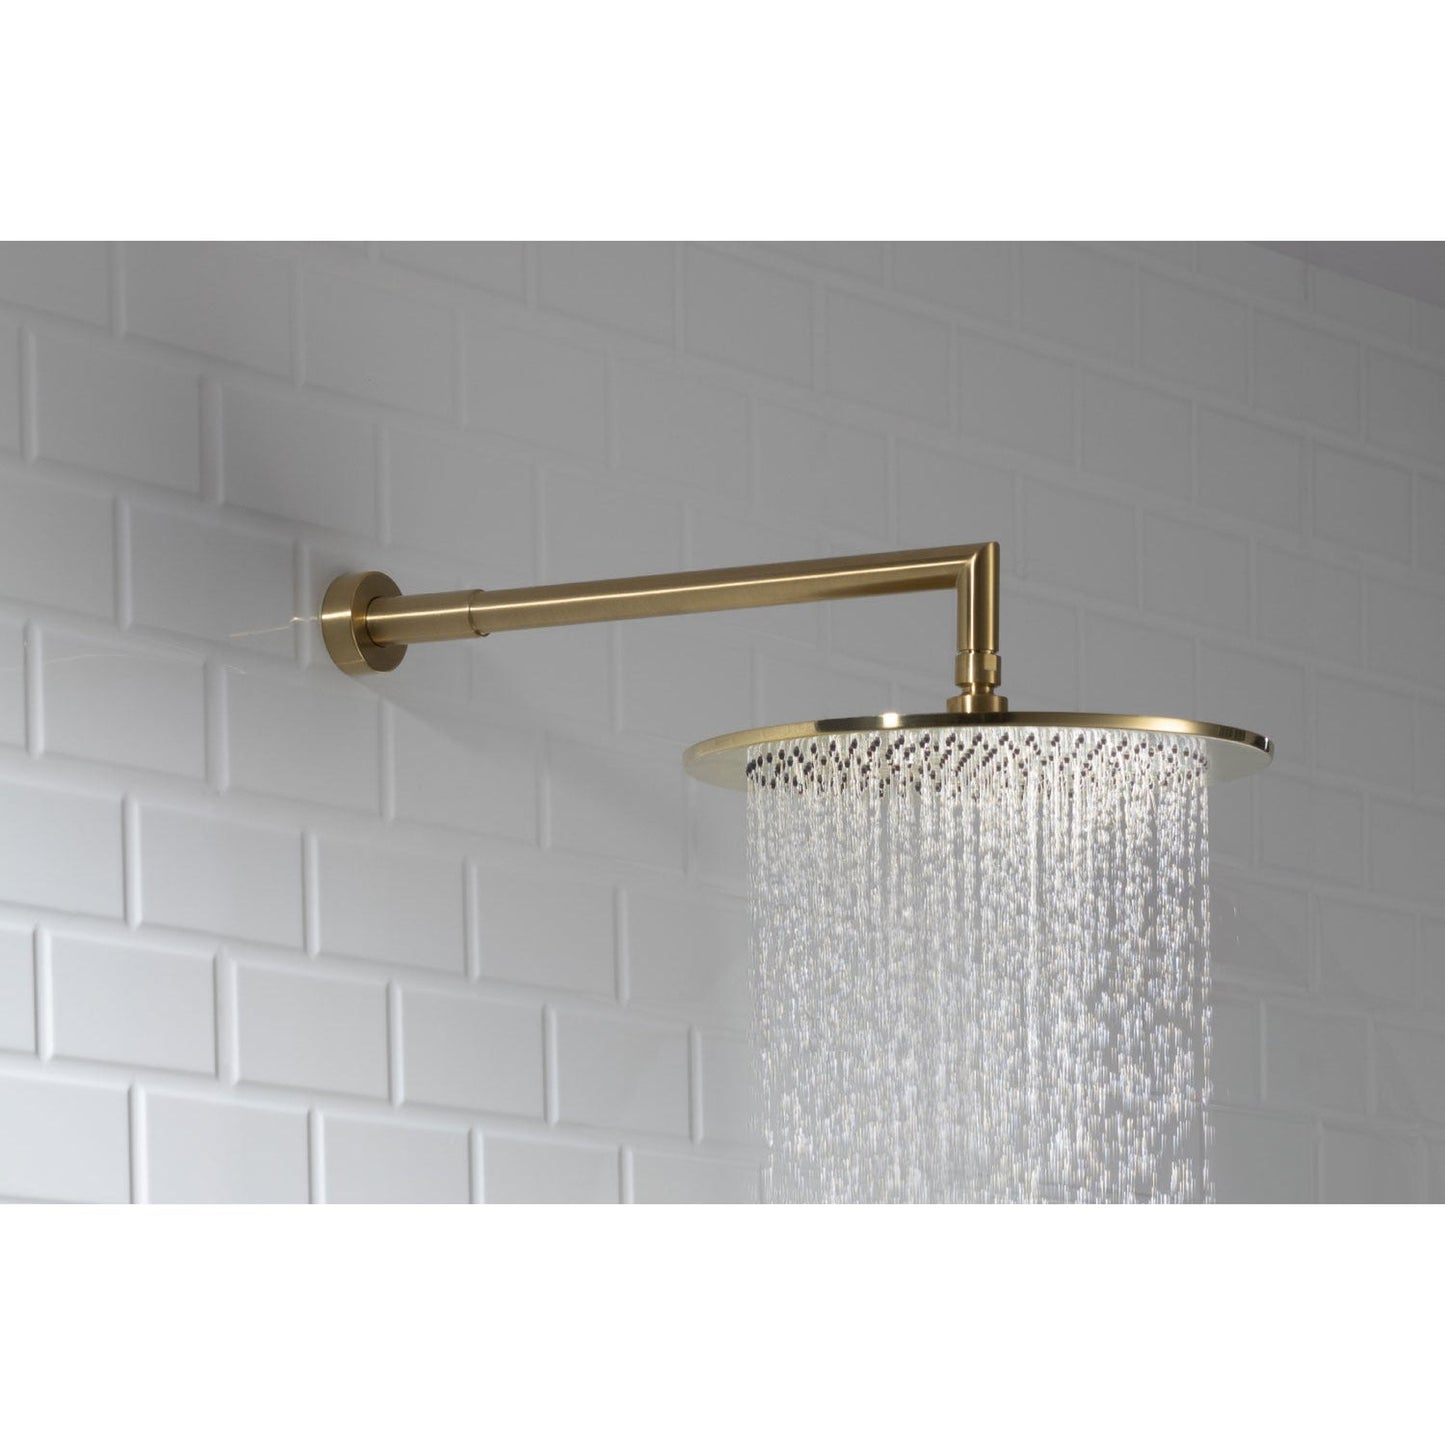 Isenberg Universal Fixtures 10" Single Function Round Chrome Solid Brass Rain Shower Head With 15" Wall Mounted Shower Arm